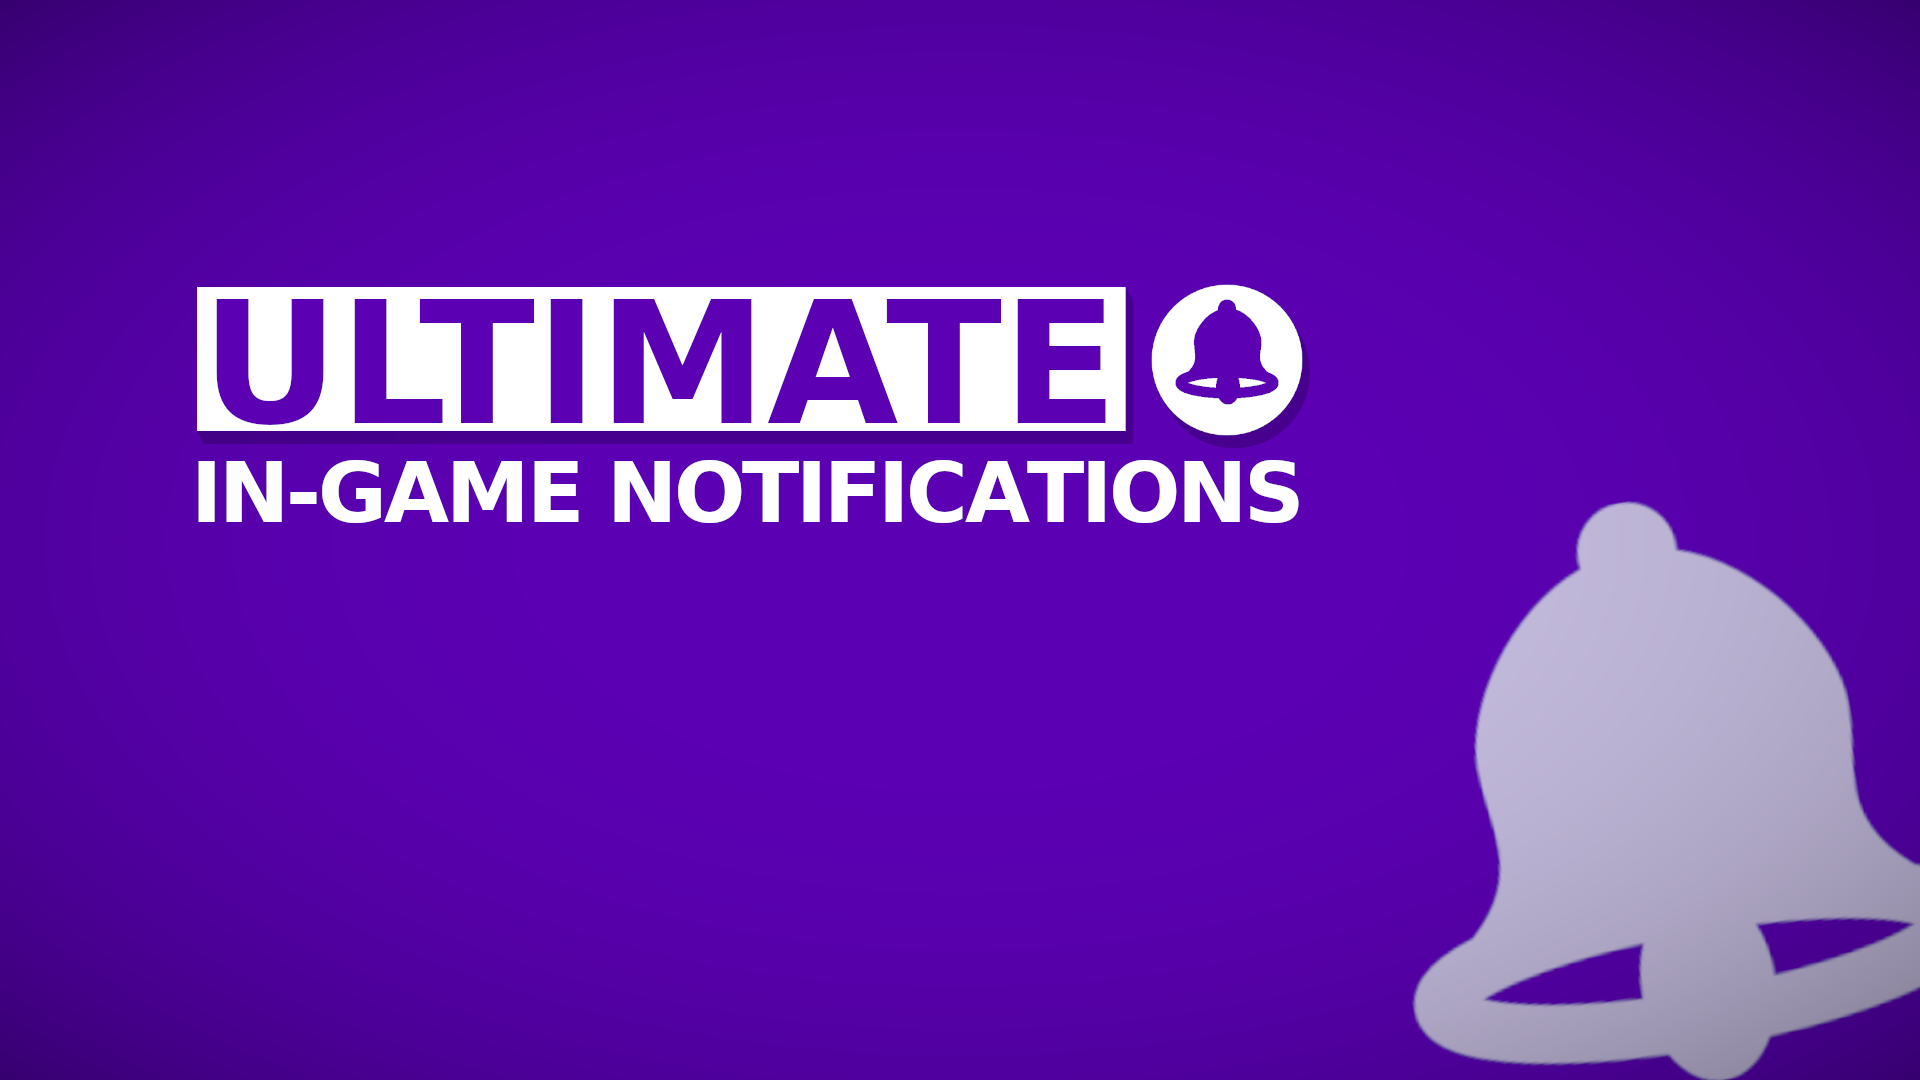 Ultimate In-Game Notifications